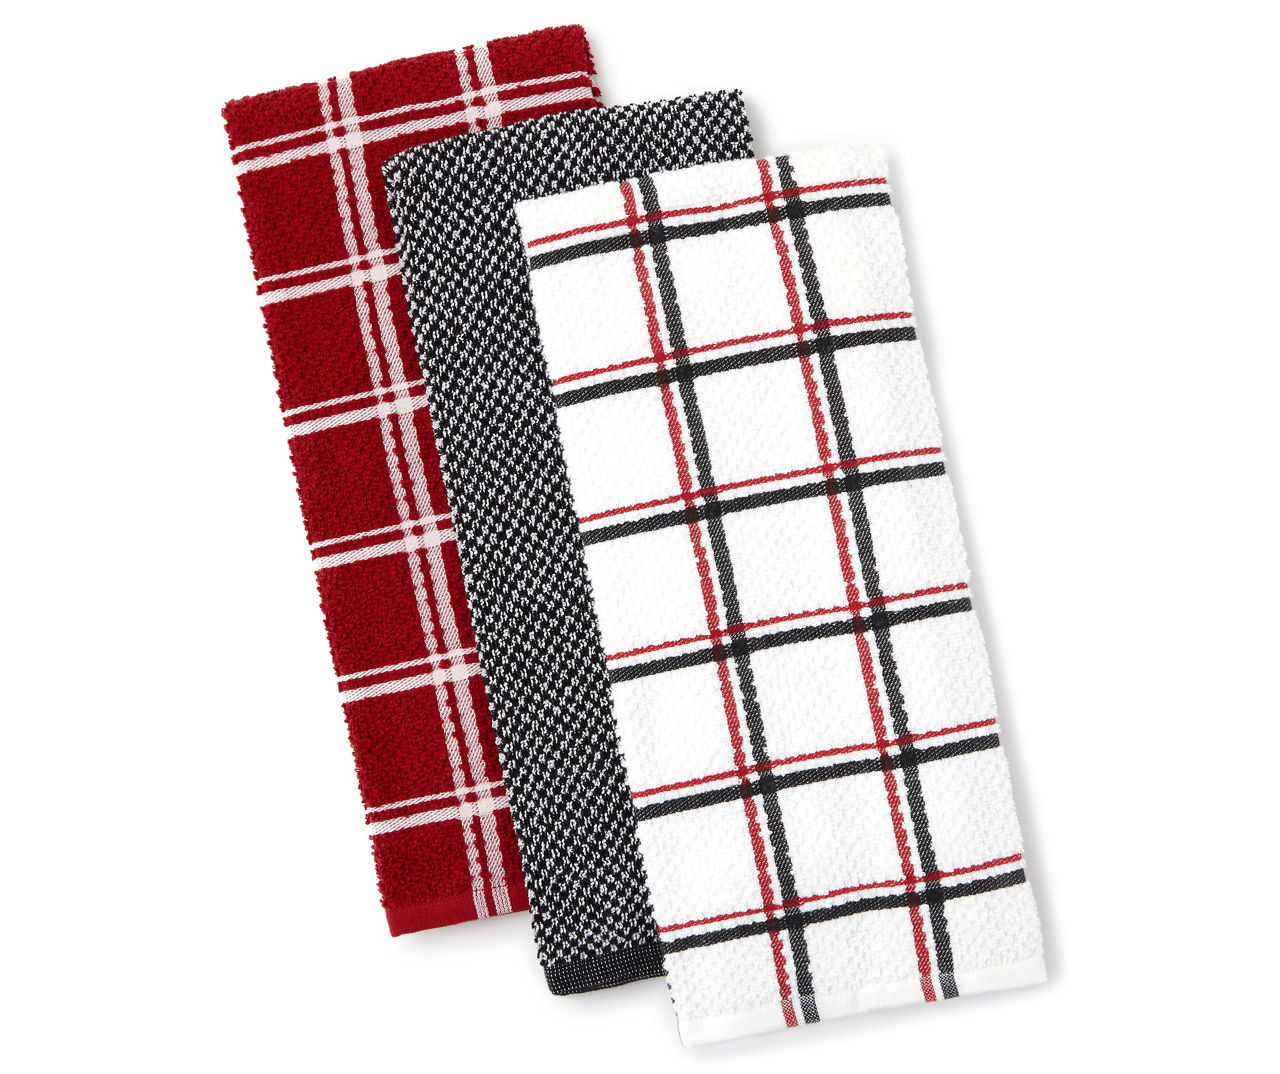 Pretty in Plaid Patterned Kitchen Towels Set of 3